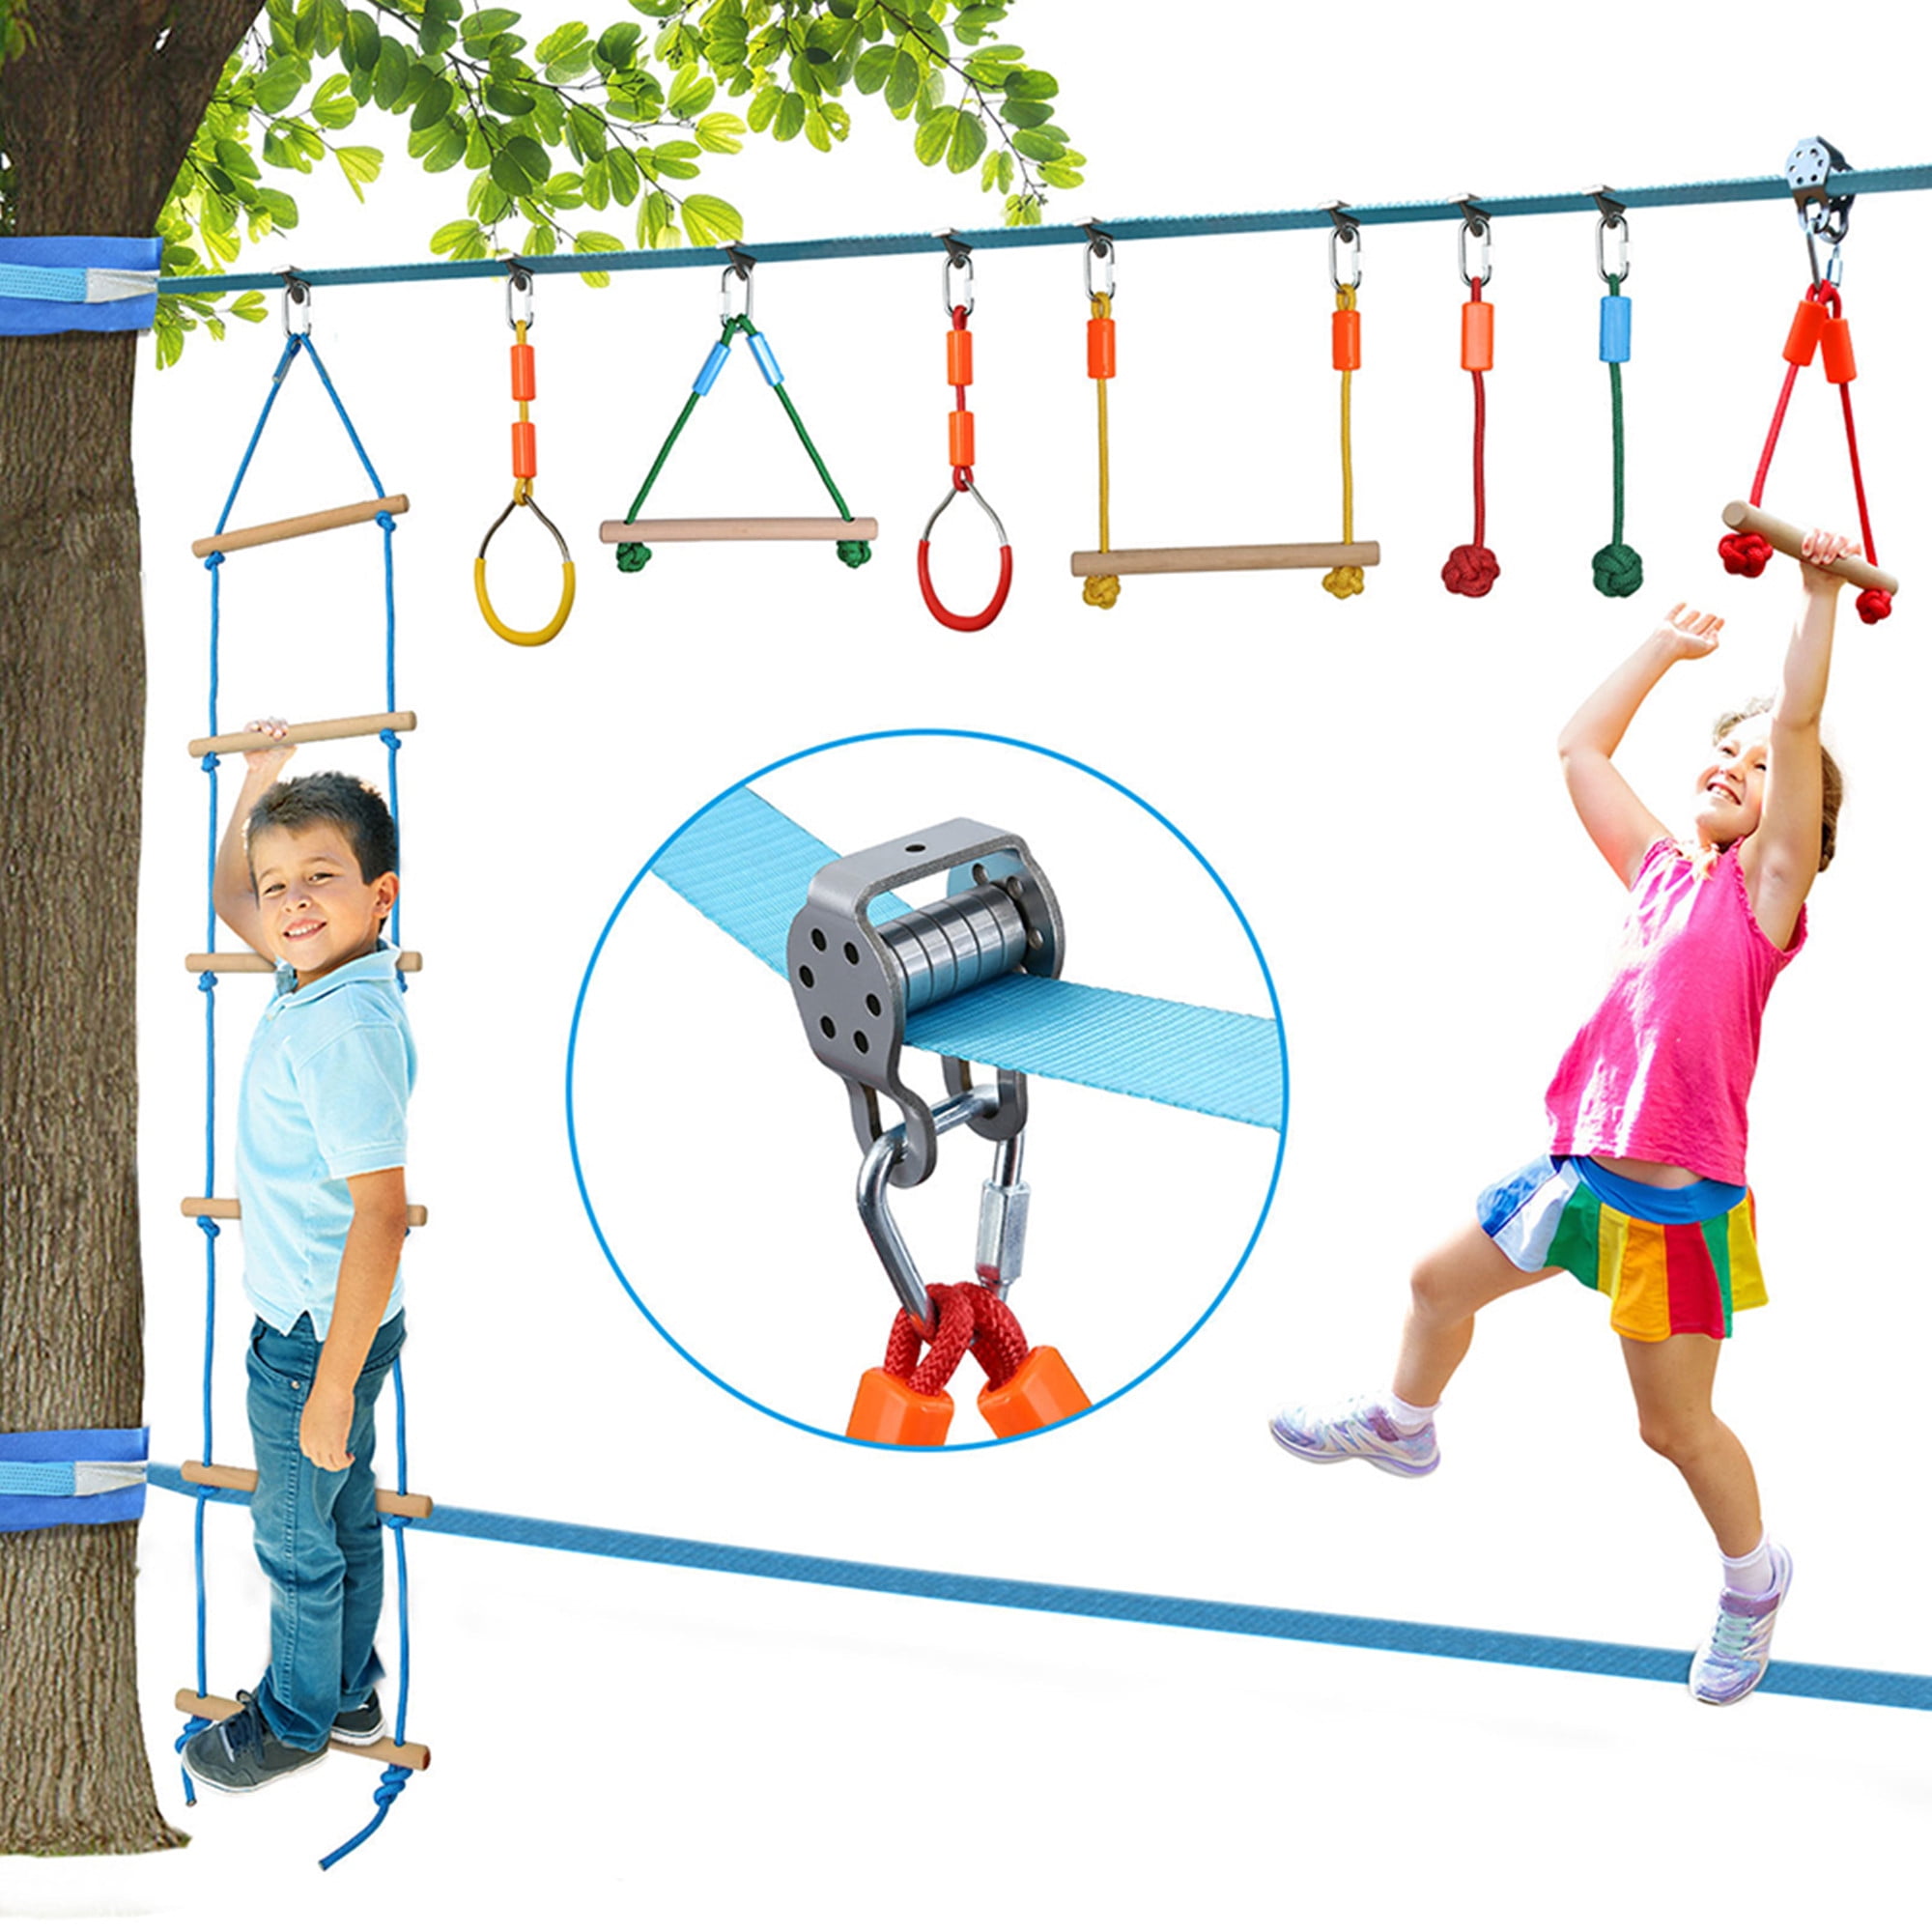 MONT PLEASANT Ninja Wheel Obstacle for Kids 10.6 inch Jungle Gyms Monkey Wheel for Ninja Line Obstacle Course Hanging Steering Wheel Swing Set Outdoor Training Equipment for Boys Girls